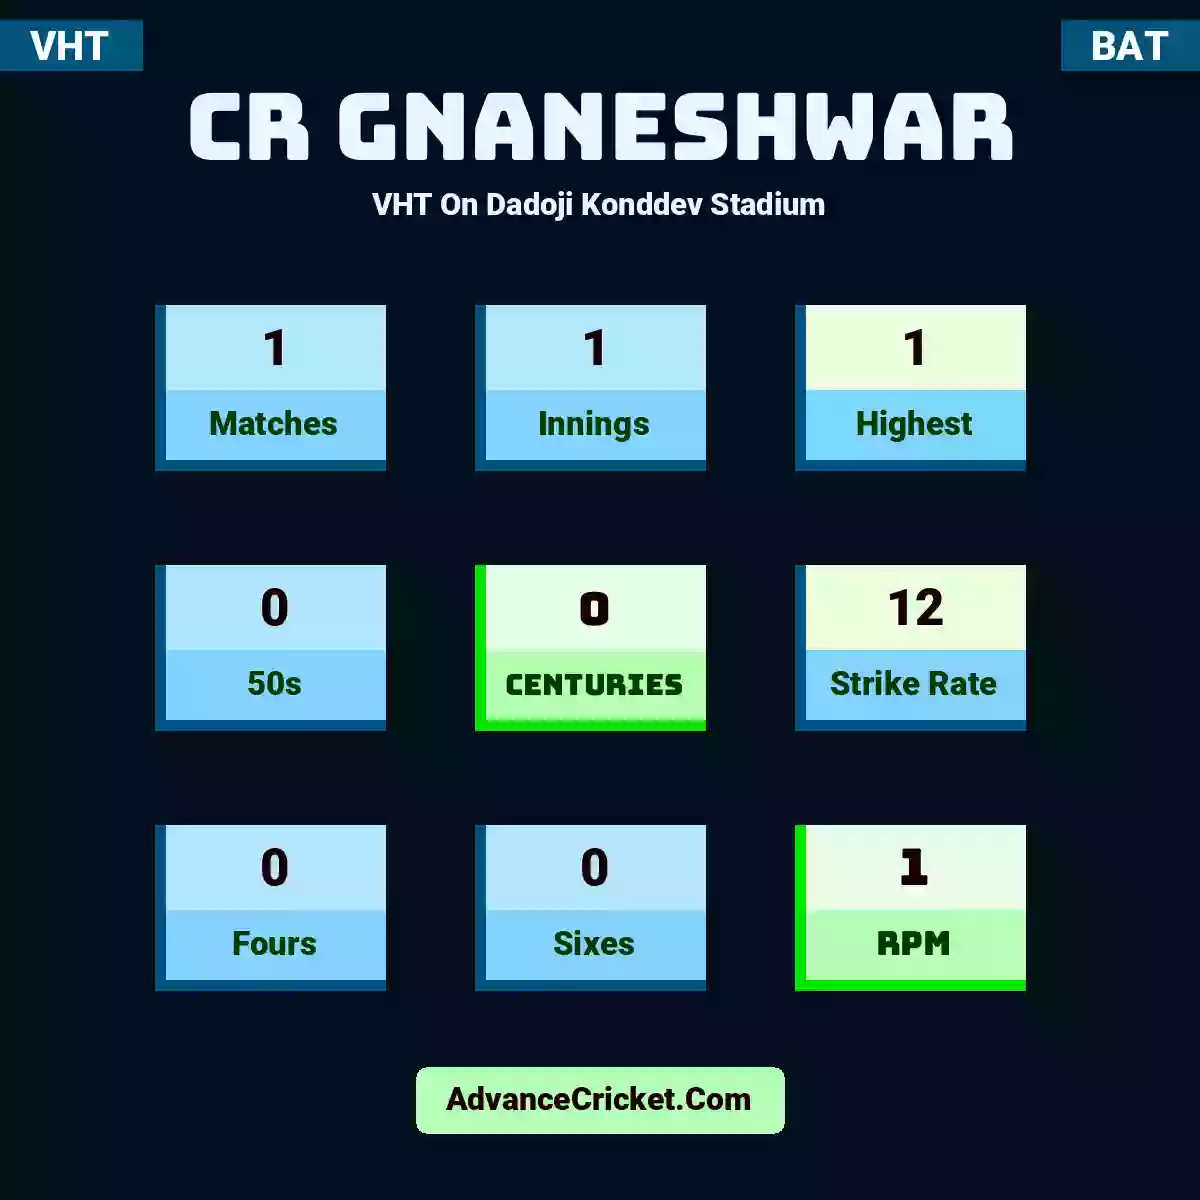 CR Gnaneshwar VHT  On Dadoji Konddev Stadium, CR Gnaneshwar played 1 matches, scored 1 runs as highest, 0 half-centuries, and 0 centuries, with a strike rate of 12. C.Gnaneshwar hit 0 fours and 0 sixes, with an RPM of 1.